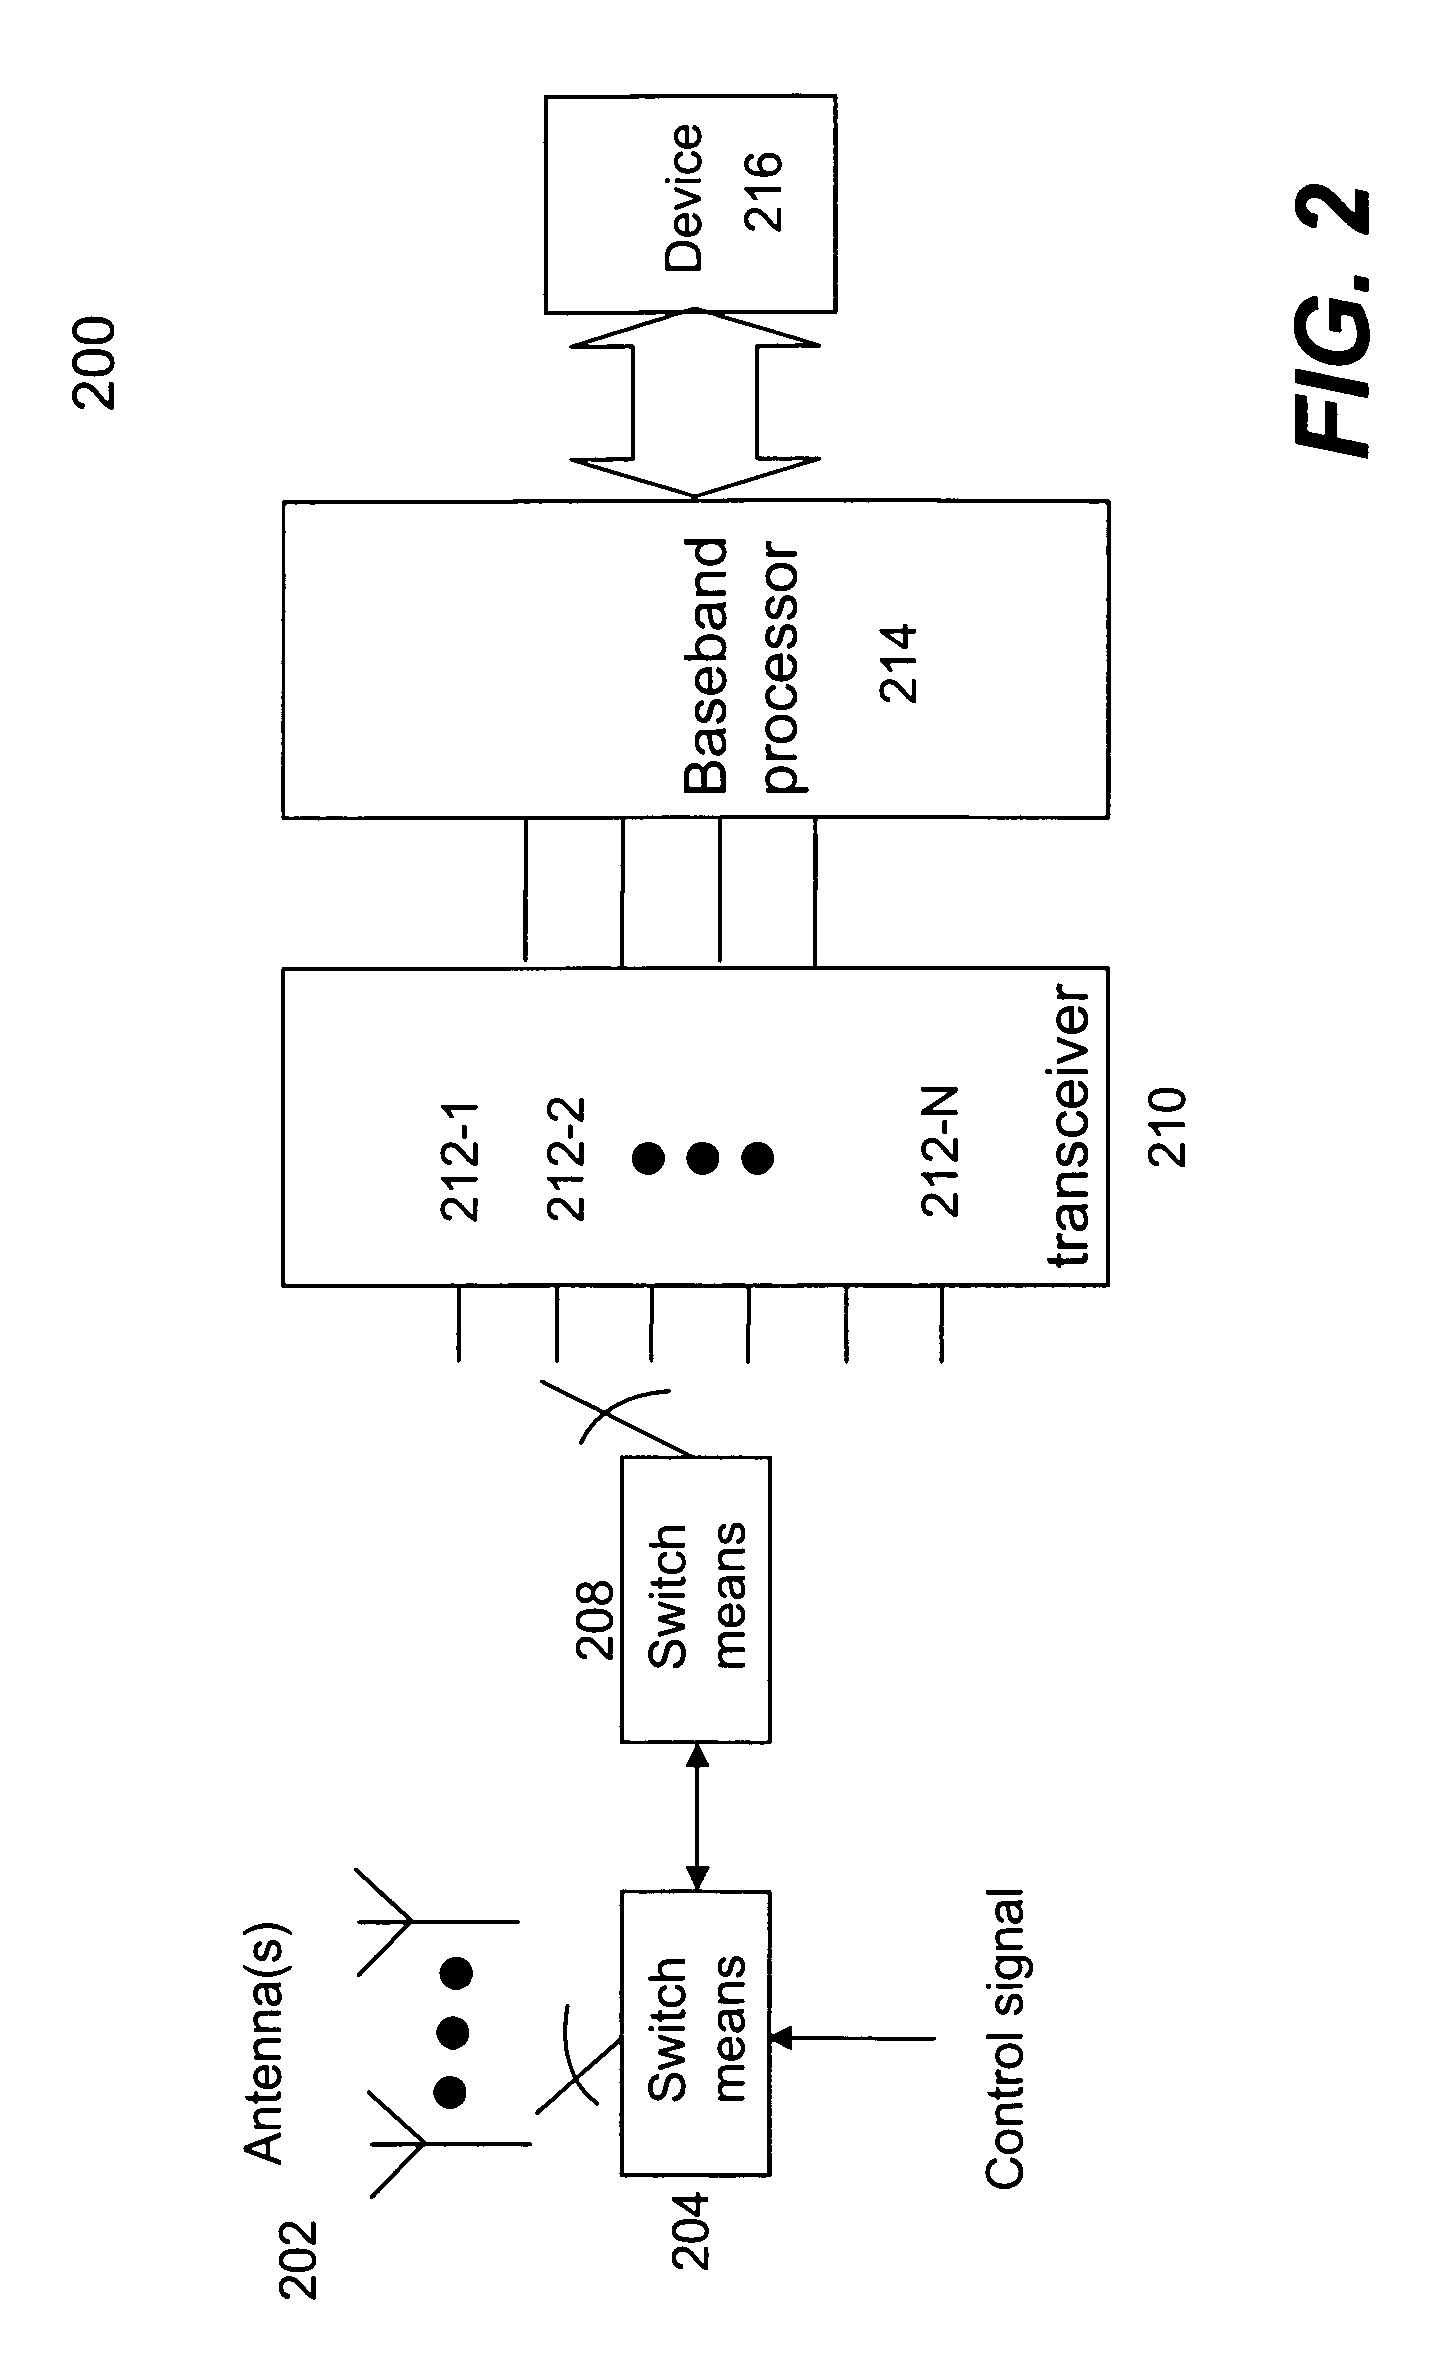 Transceiver architecture for supporting multi-band RF